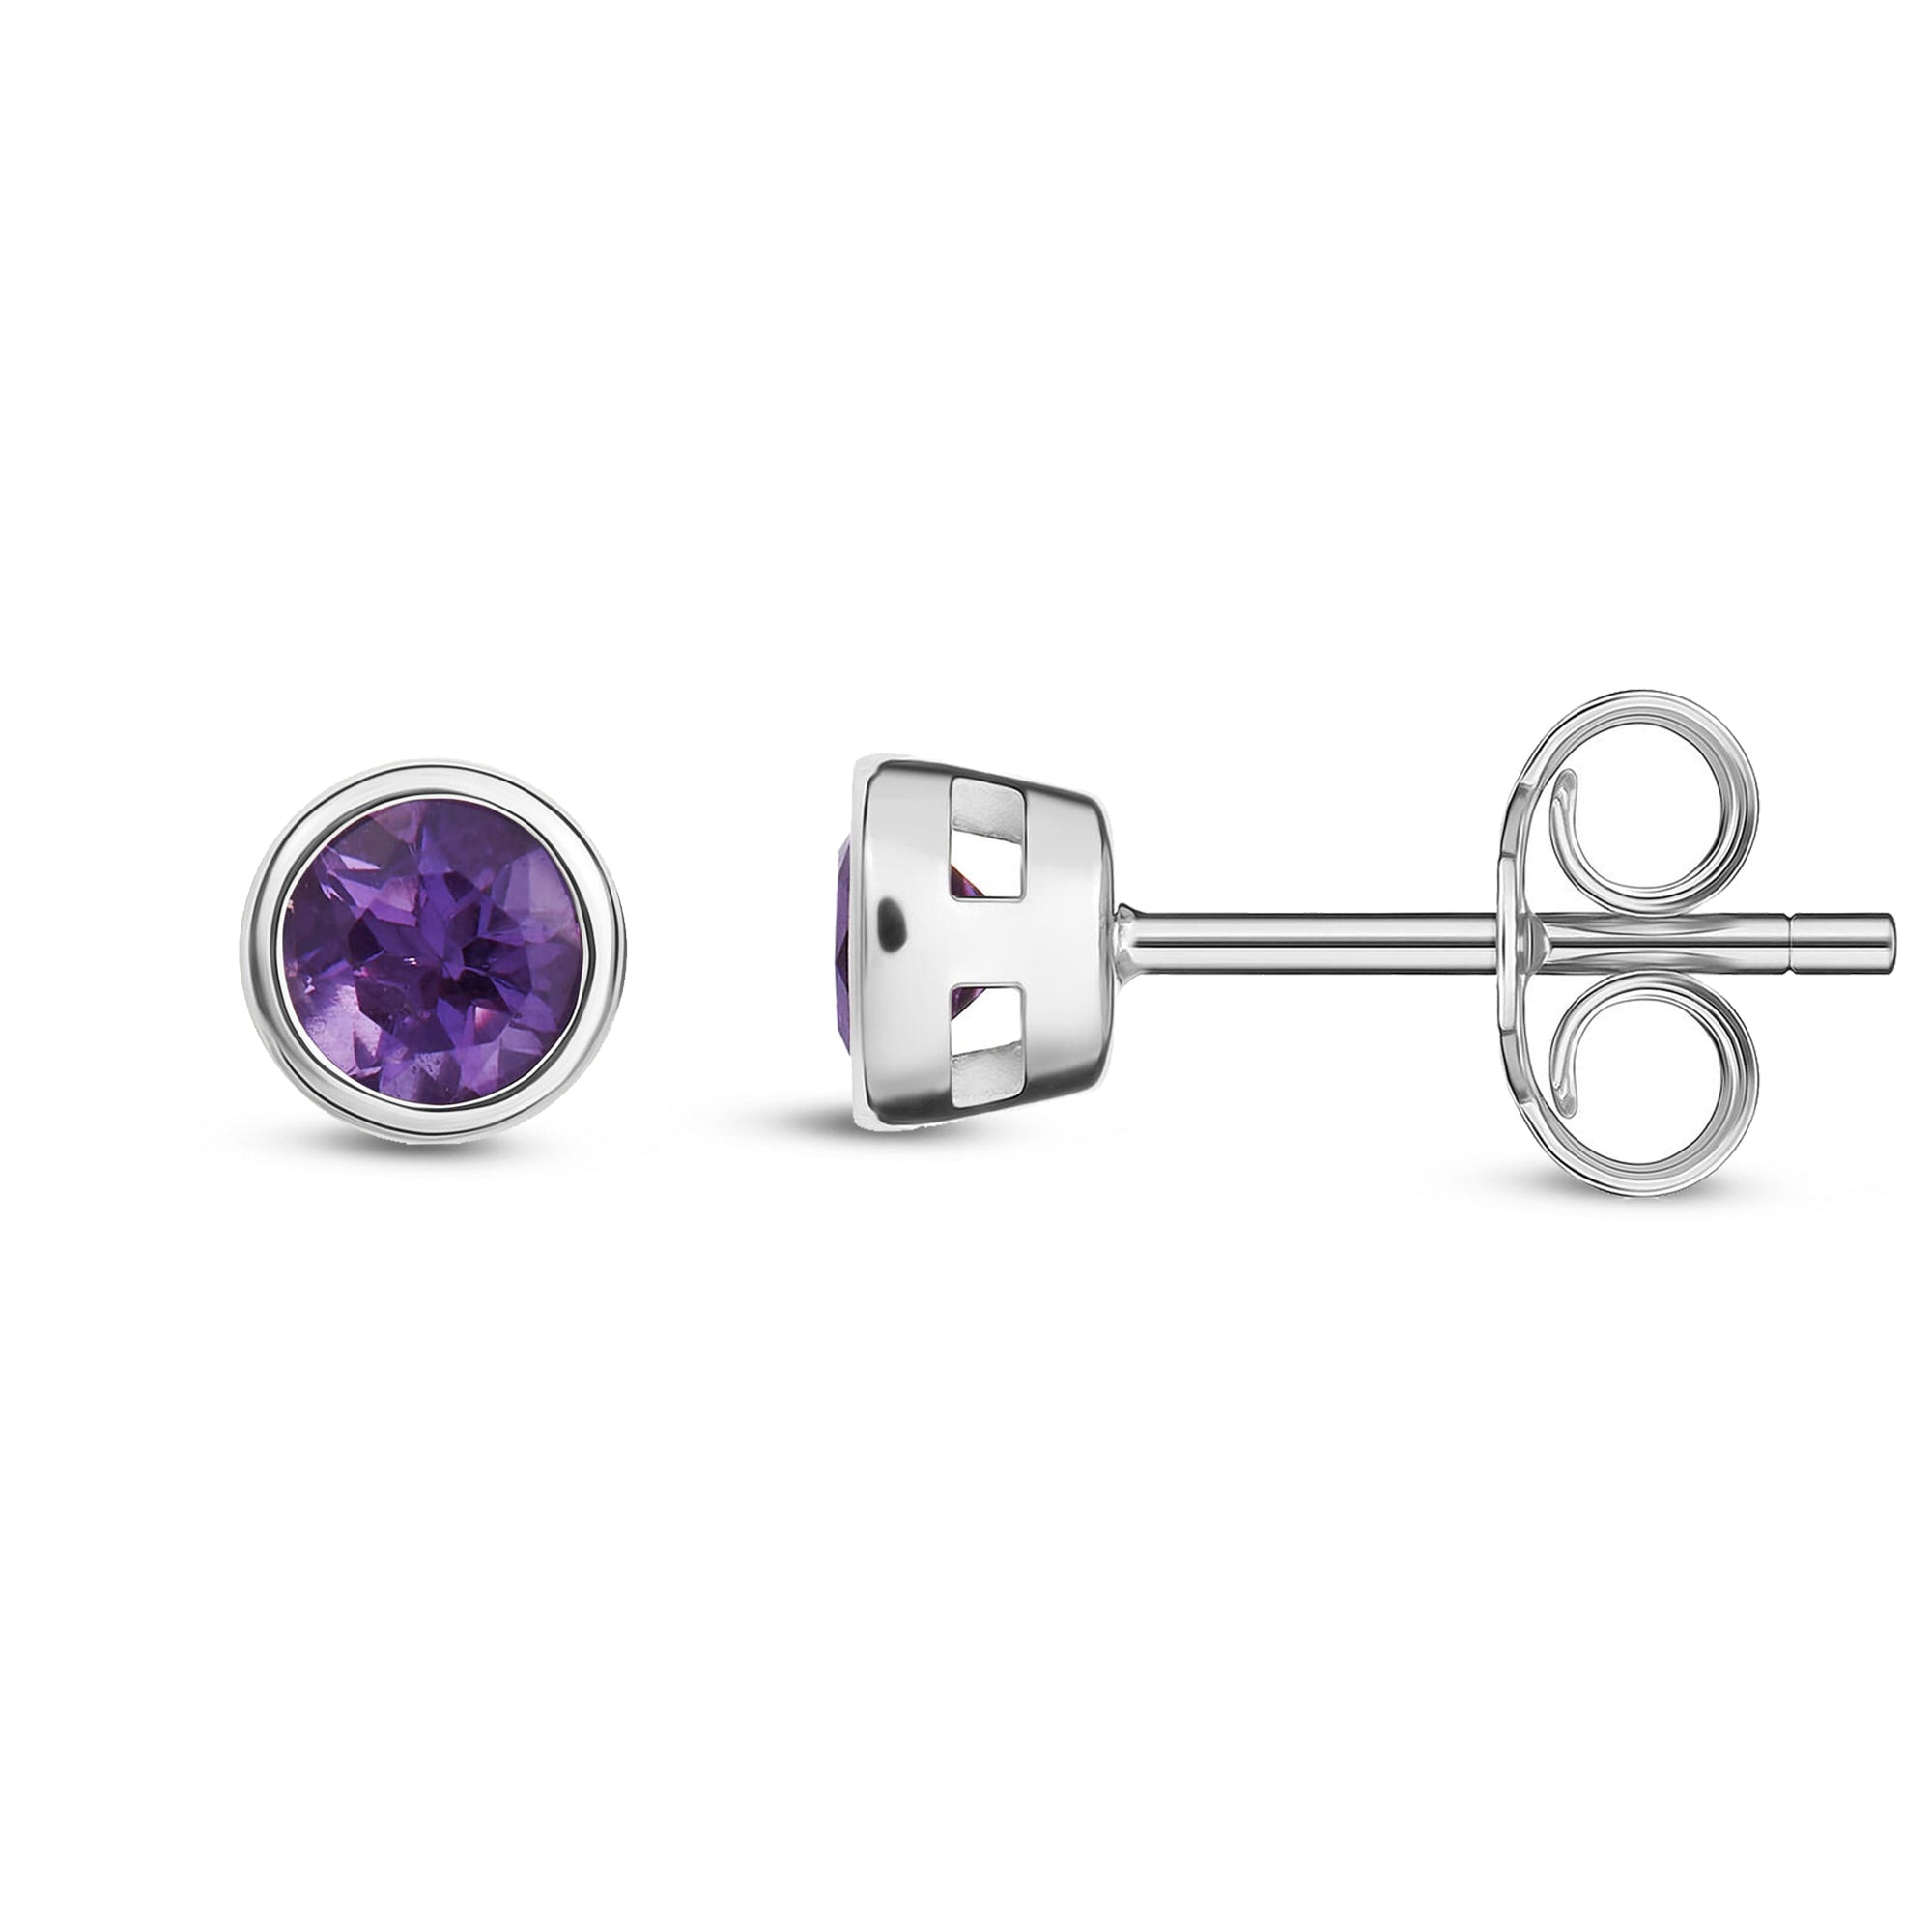 9ct White Gold 3mm Rubover Amethyst Stud Earrings 0.2ct